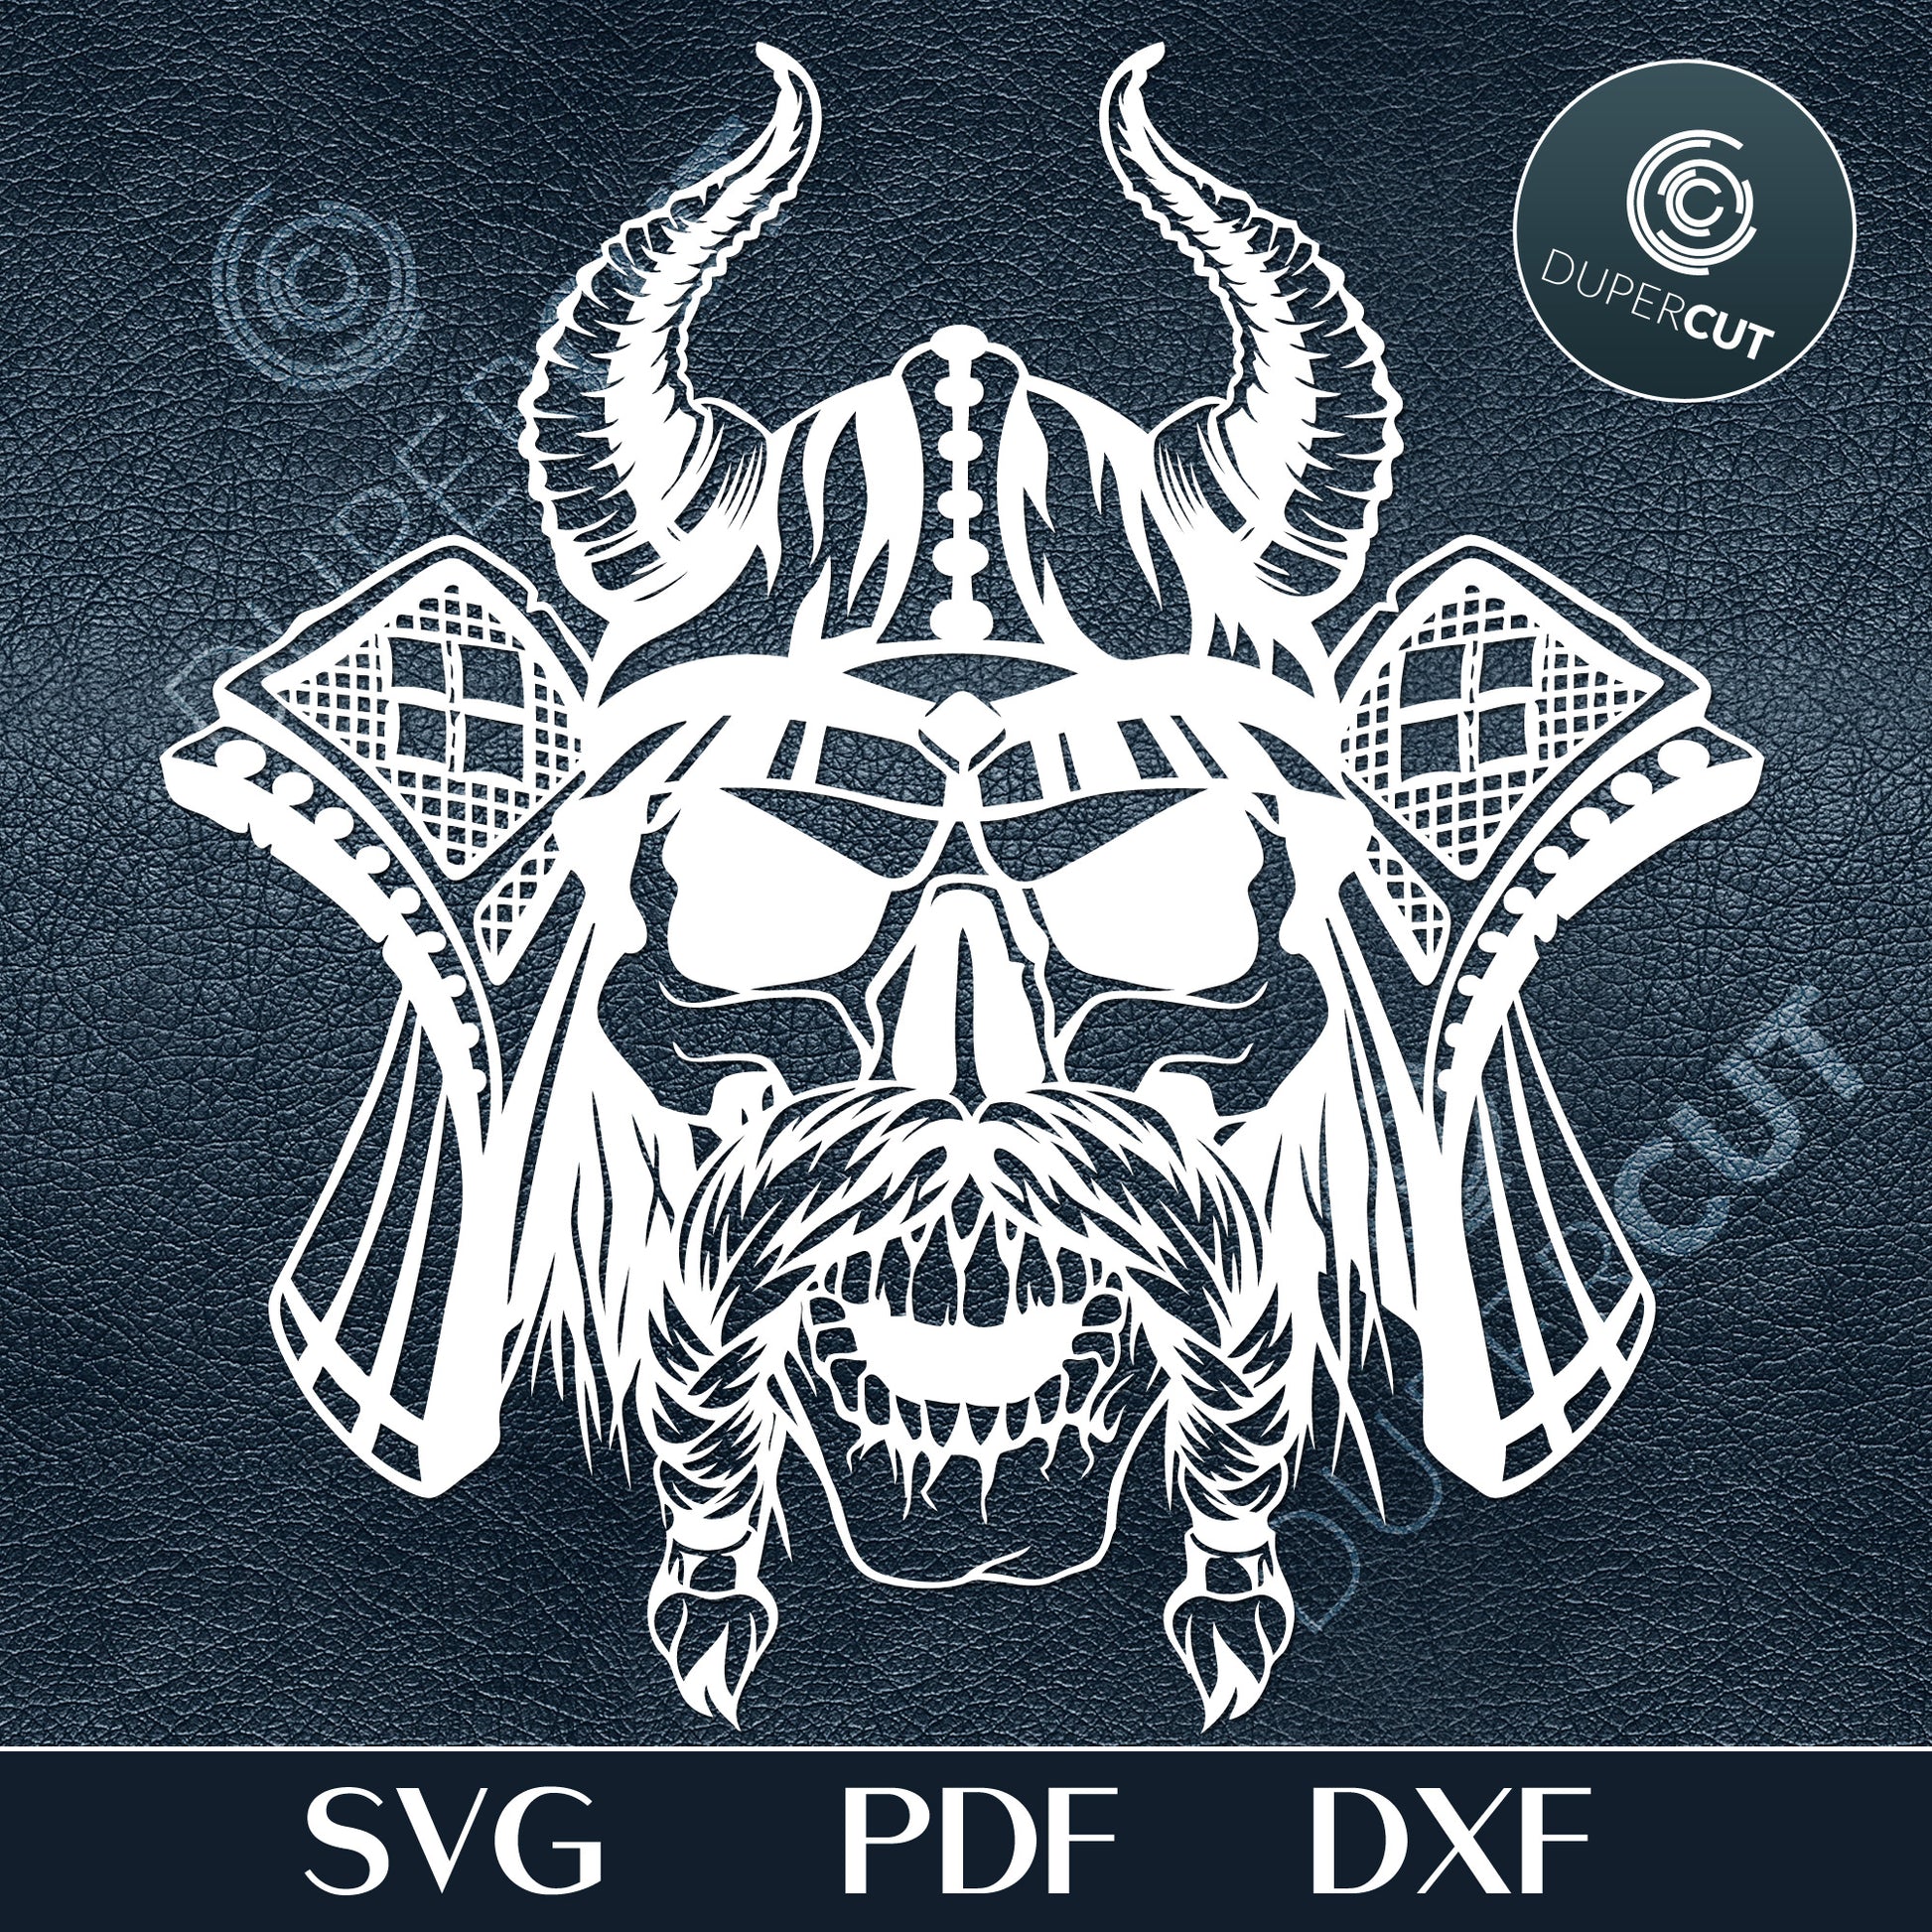 Viking Skull gothic line art. Paper cutting template SVG PNG DXF files. For DIY projects Cricut, Glowforge, Silhouette Cameo, CNC Machines.